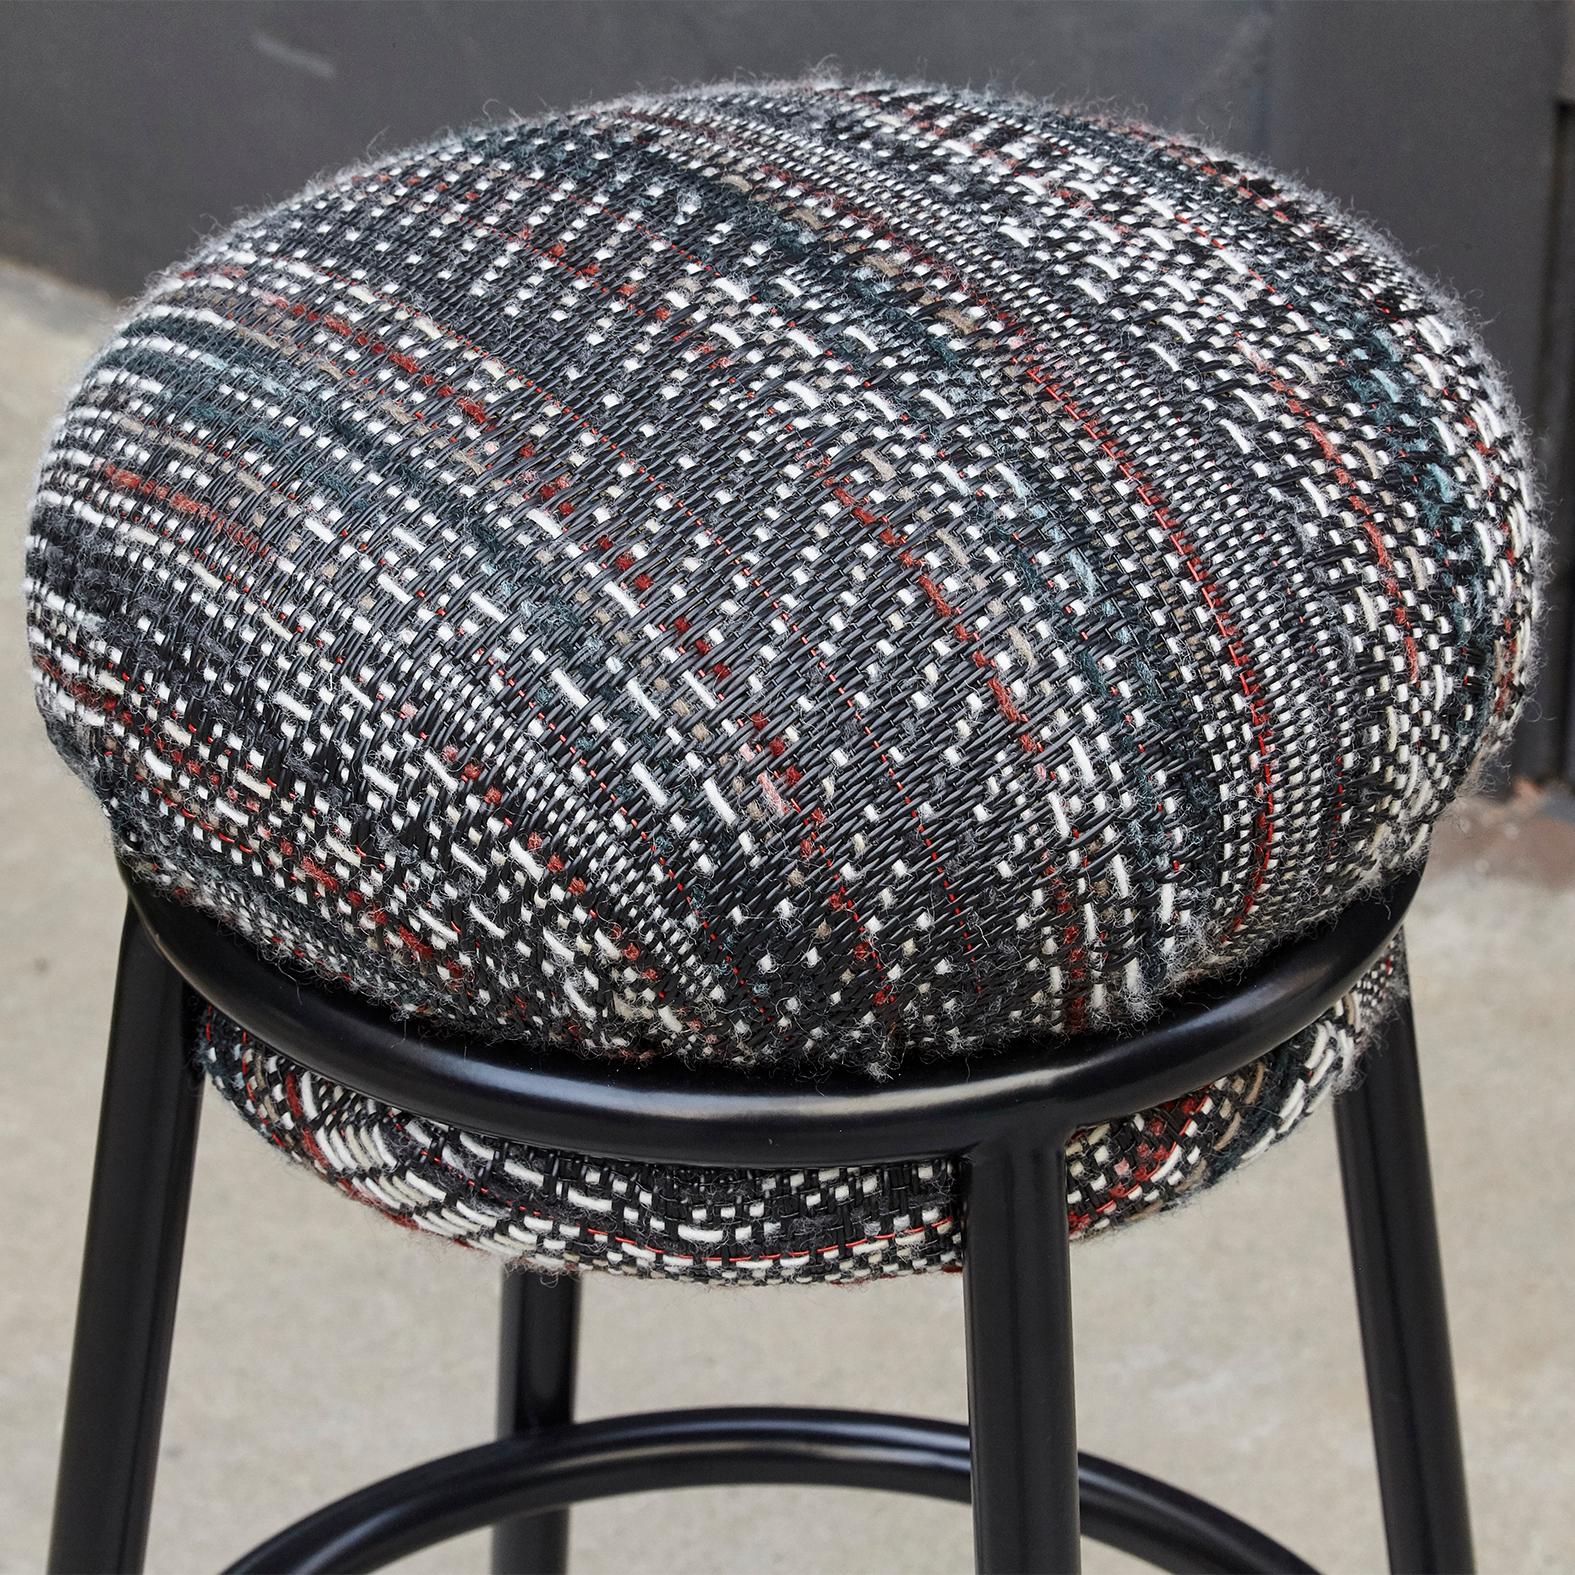 Modern Stephen Burks Grasso Contemporary Fabric Upholstery, Blac Lacquered Metal Stool 